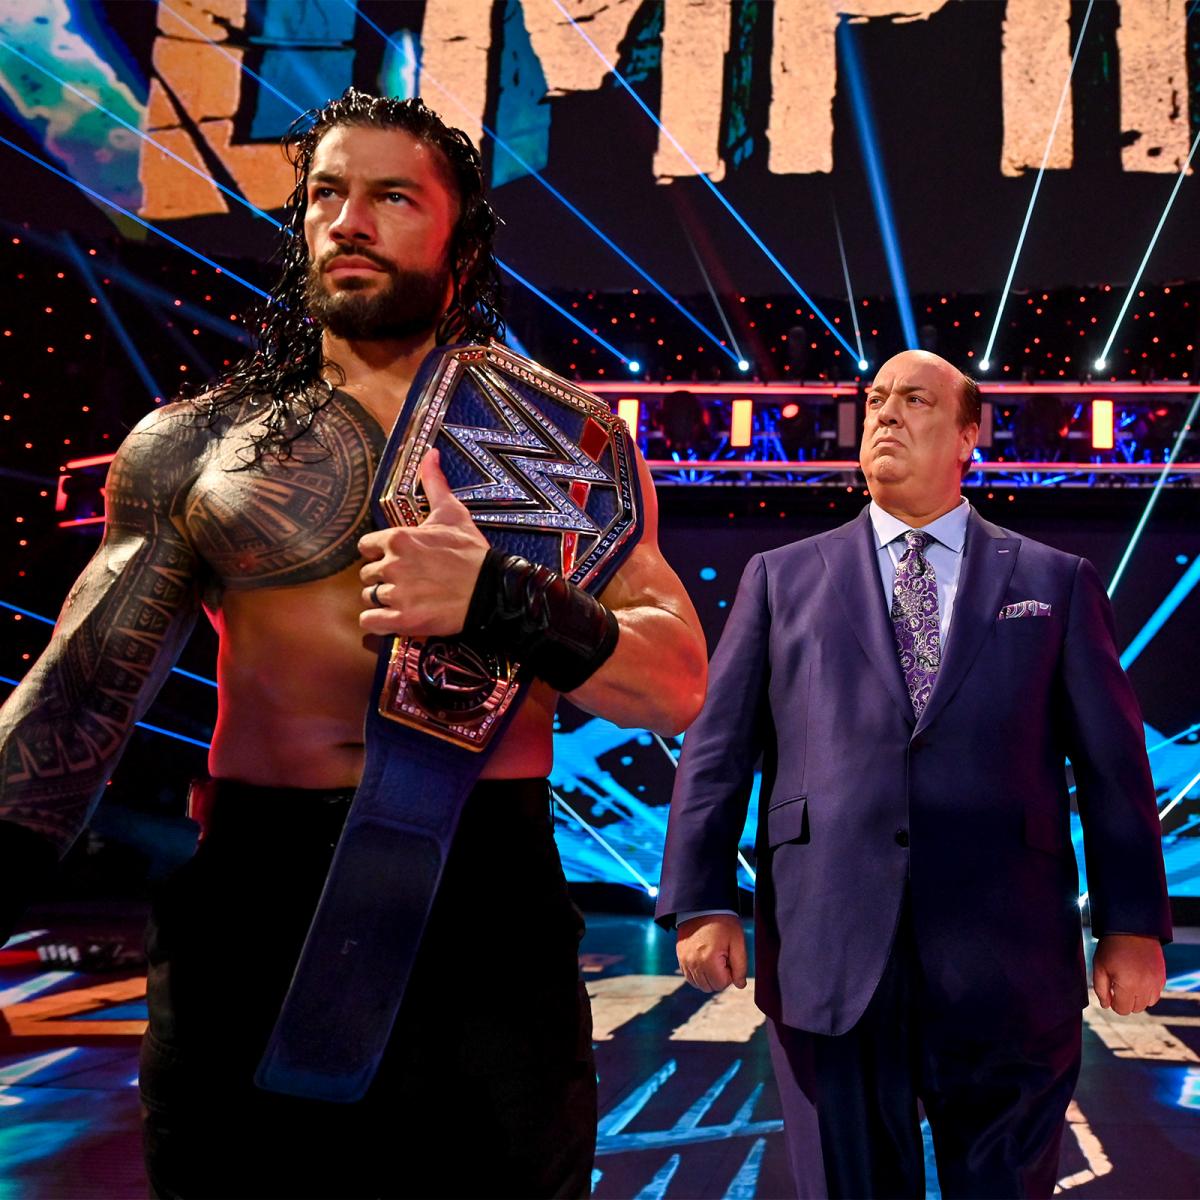 Roman Reigns wanted to work with Paul Heyman and Michael Hayes